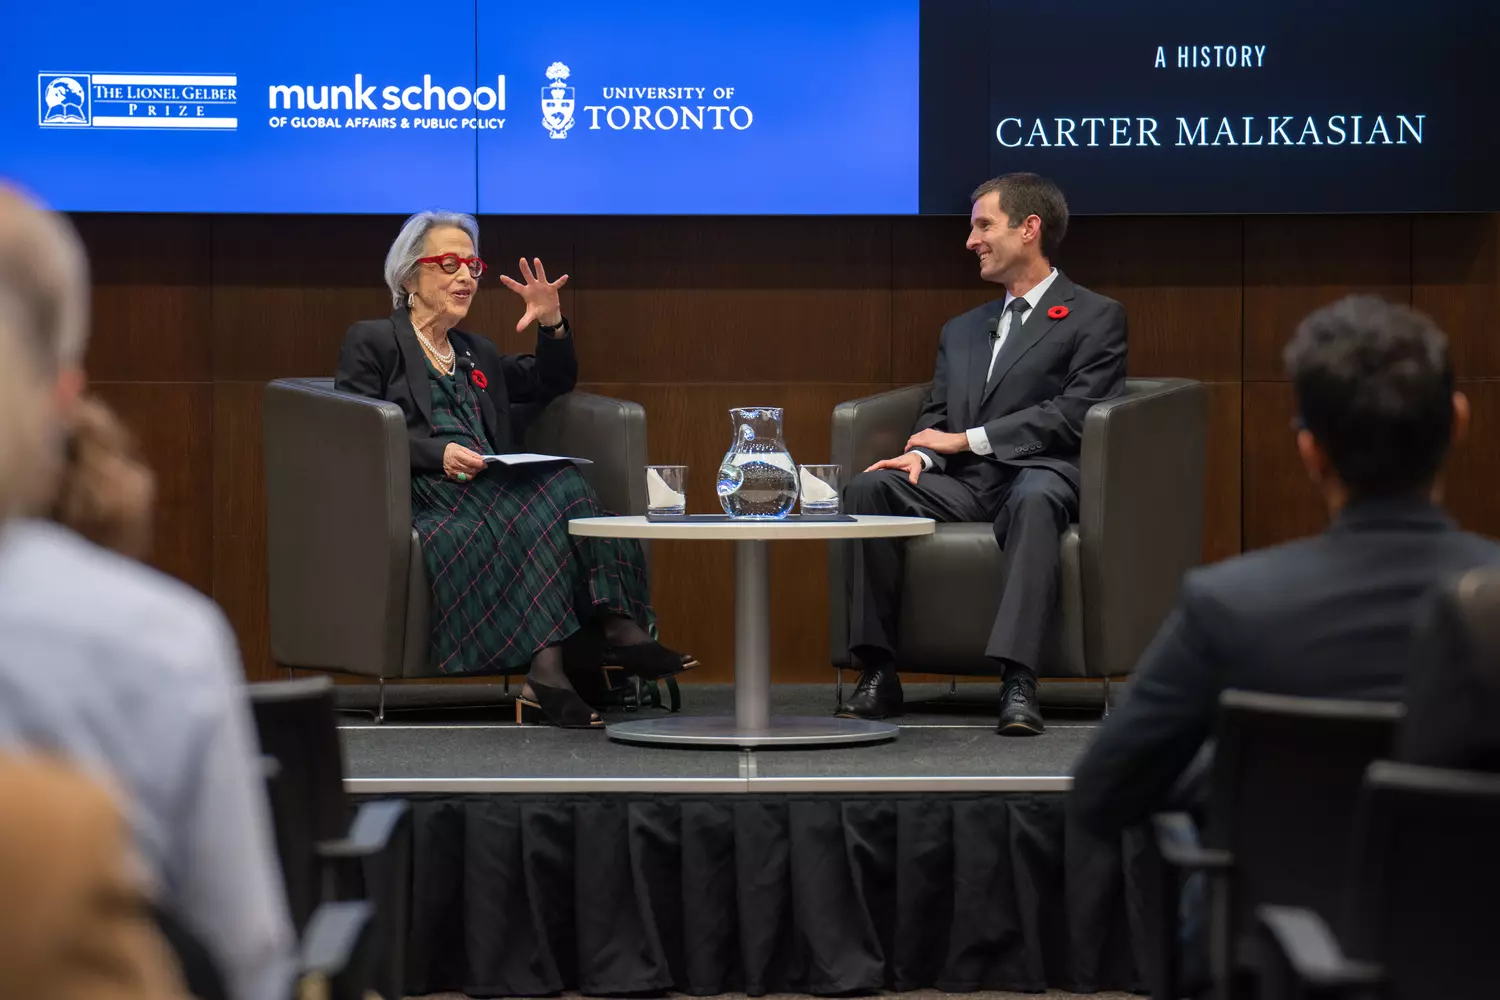 Carter Malkasian in conversation with Janice Stein of the Munk School